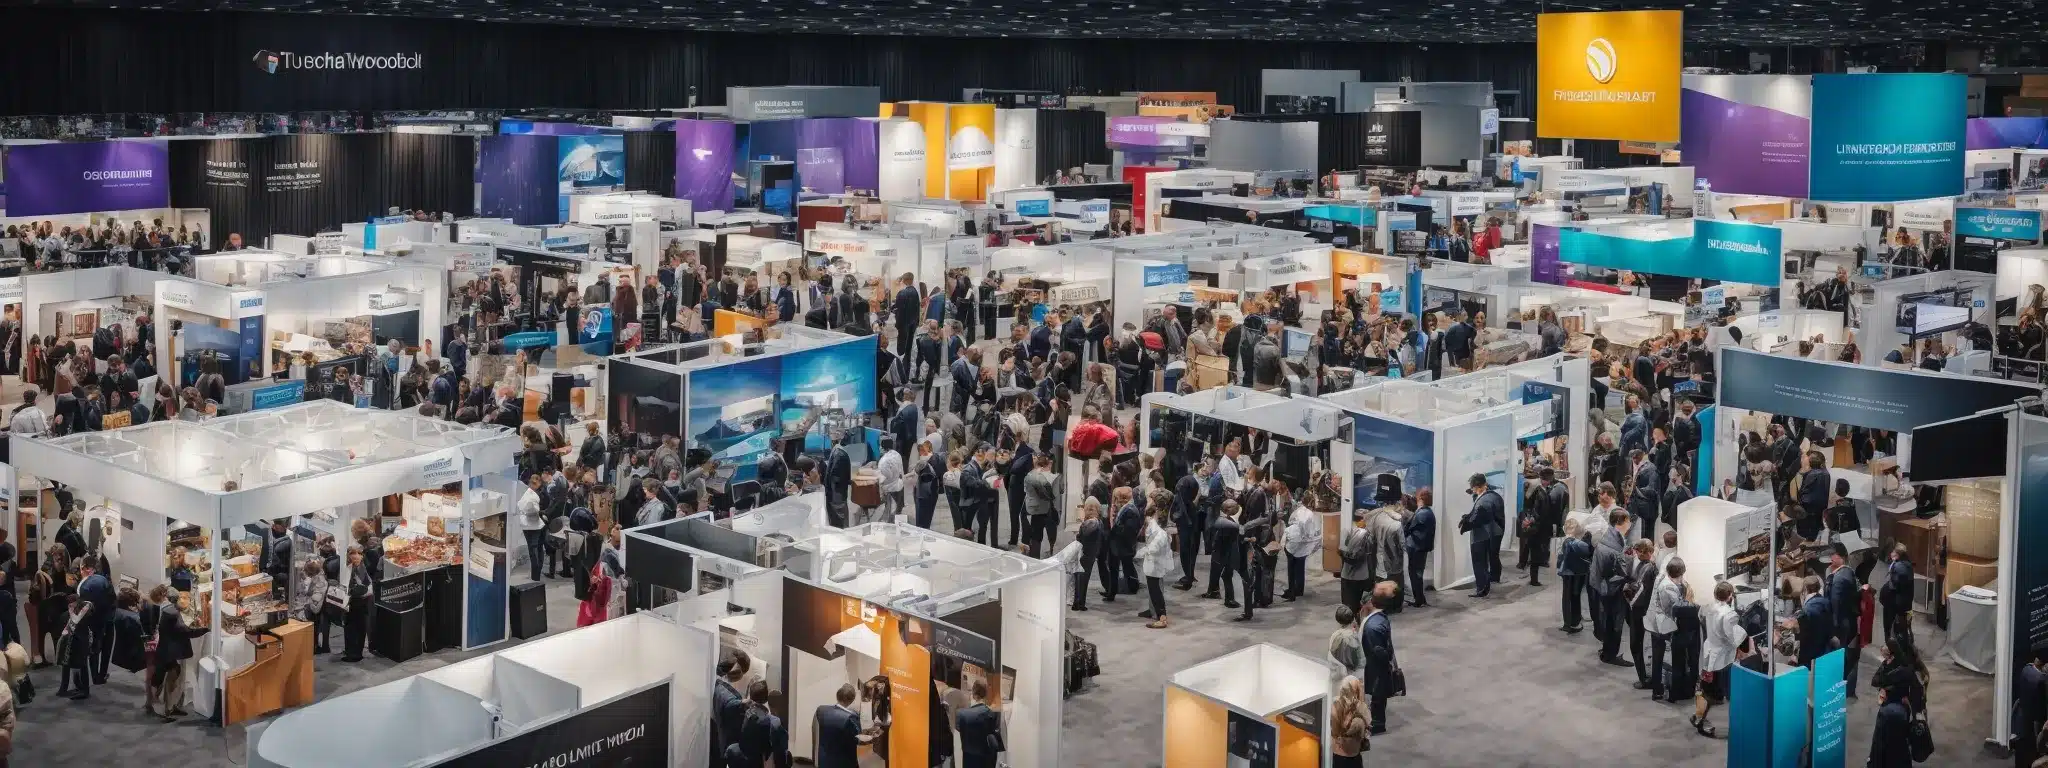 A Bustling Trade Show Floor Filled With Vibrant Booths And Marketing Materials, Where Businesses Showcase Their Products And Connect With Potential Partners.